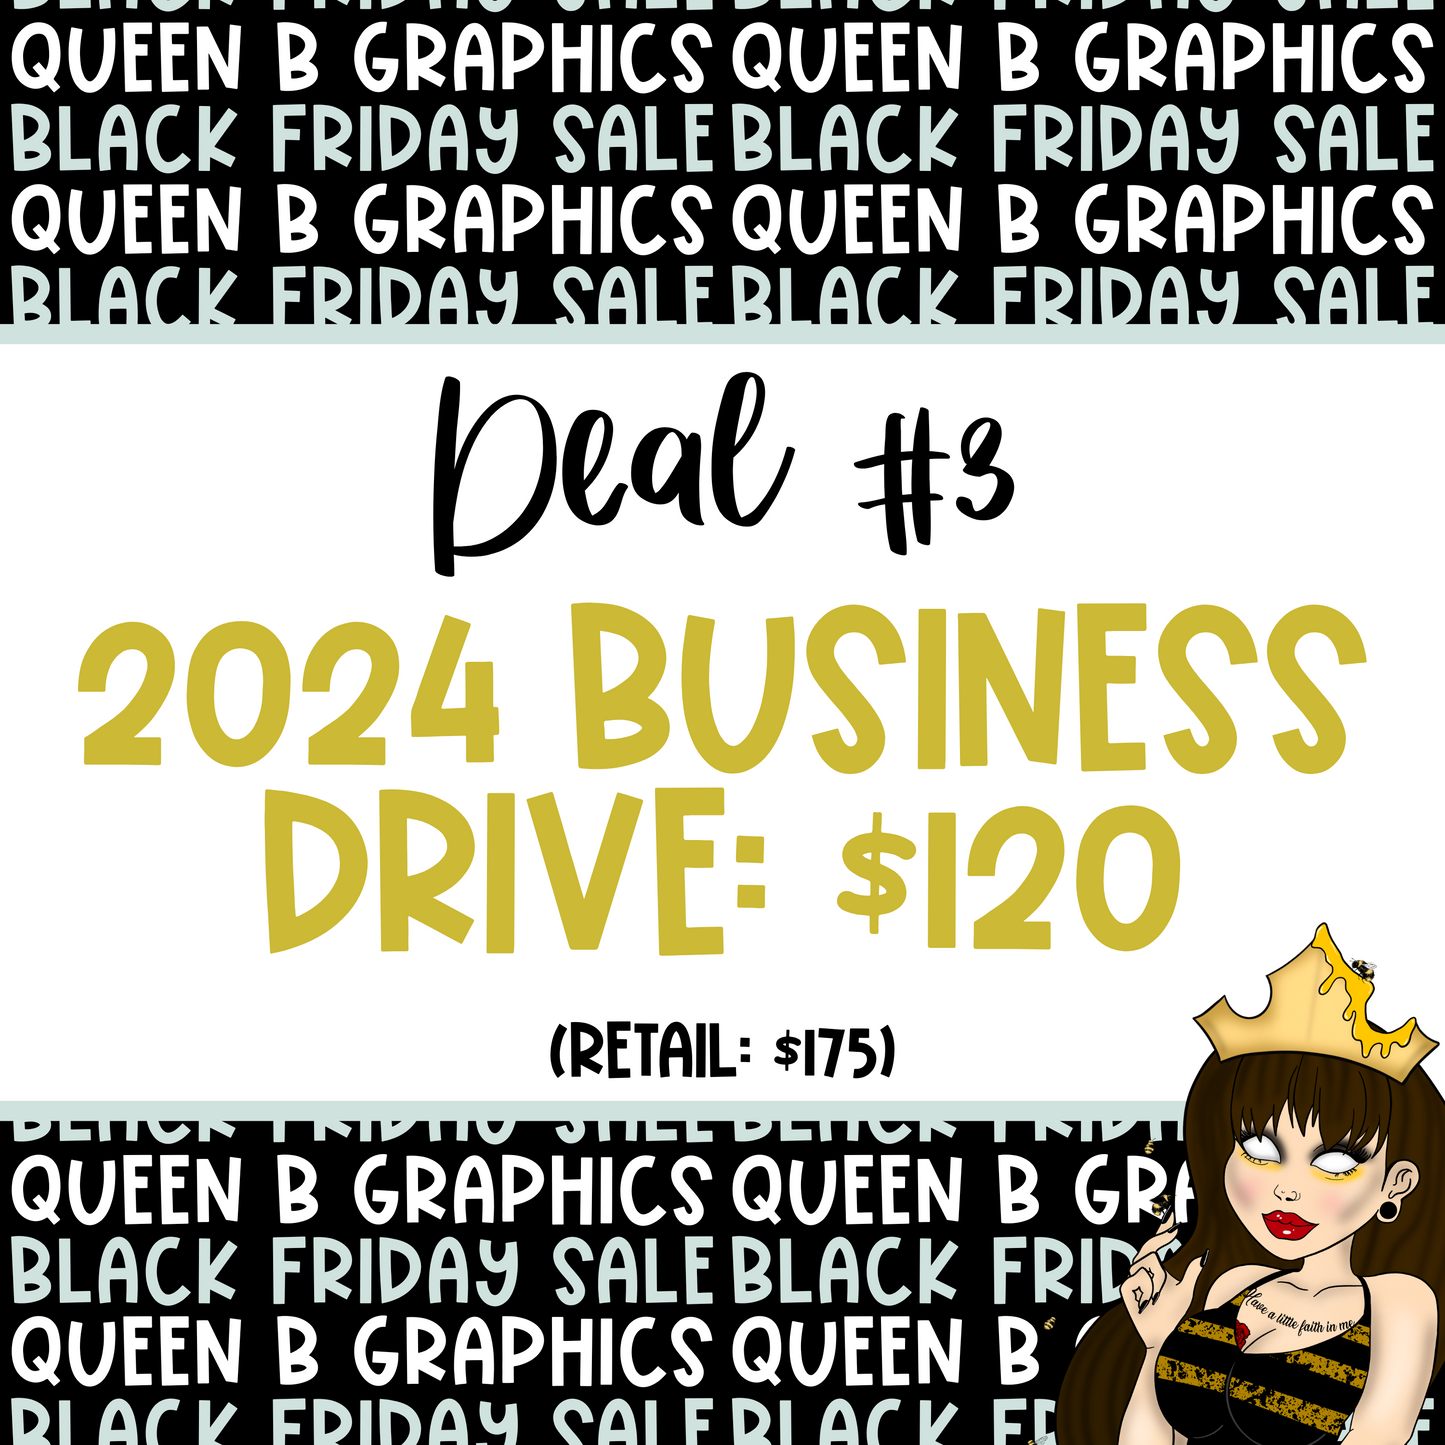 Discounted 2024 Business Drive